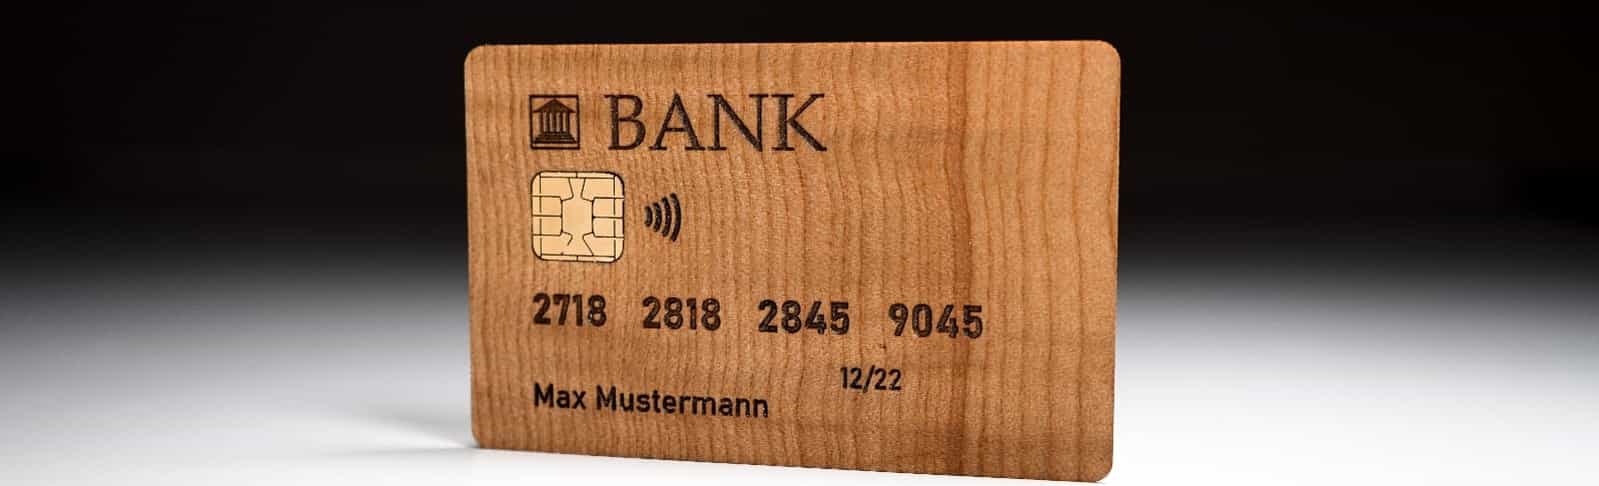 Credit cards, debit cards and insurance cards made of sustainable wood